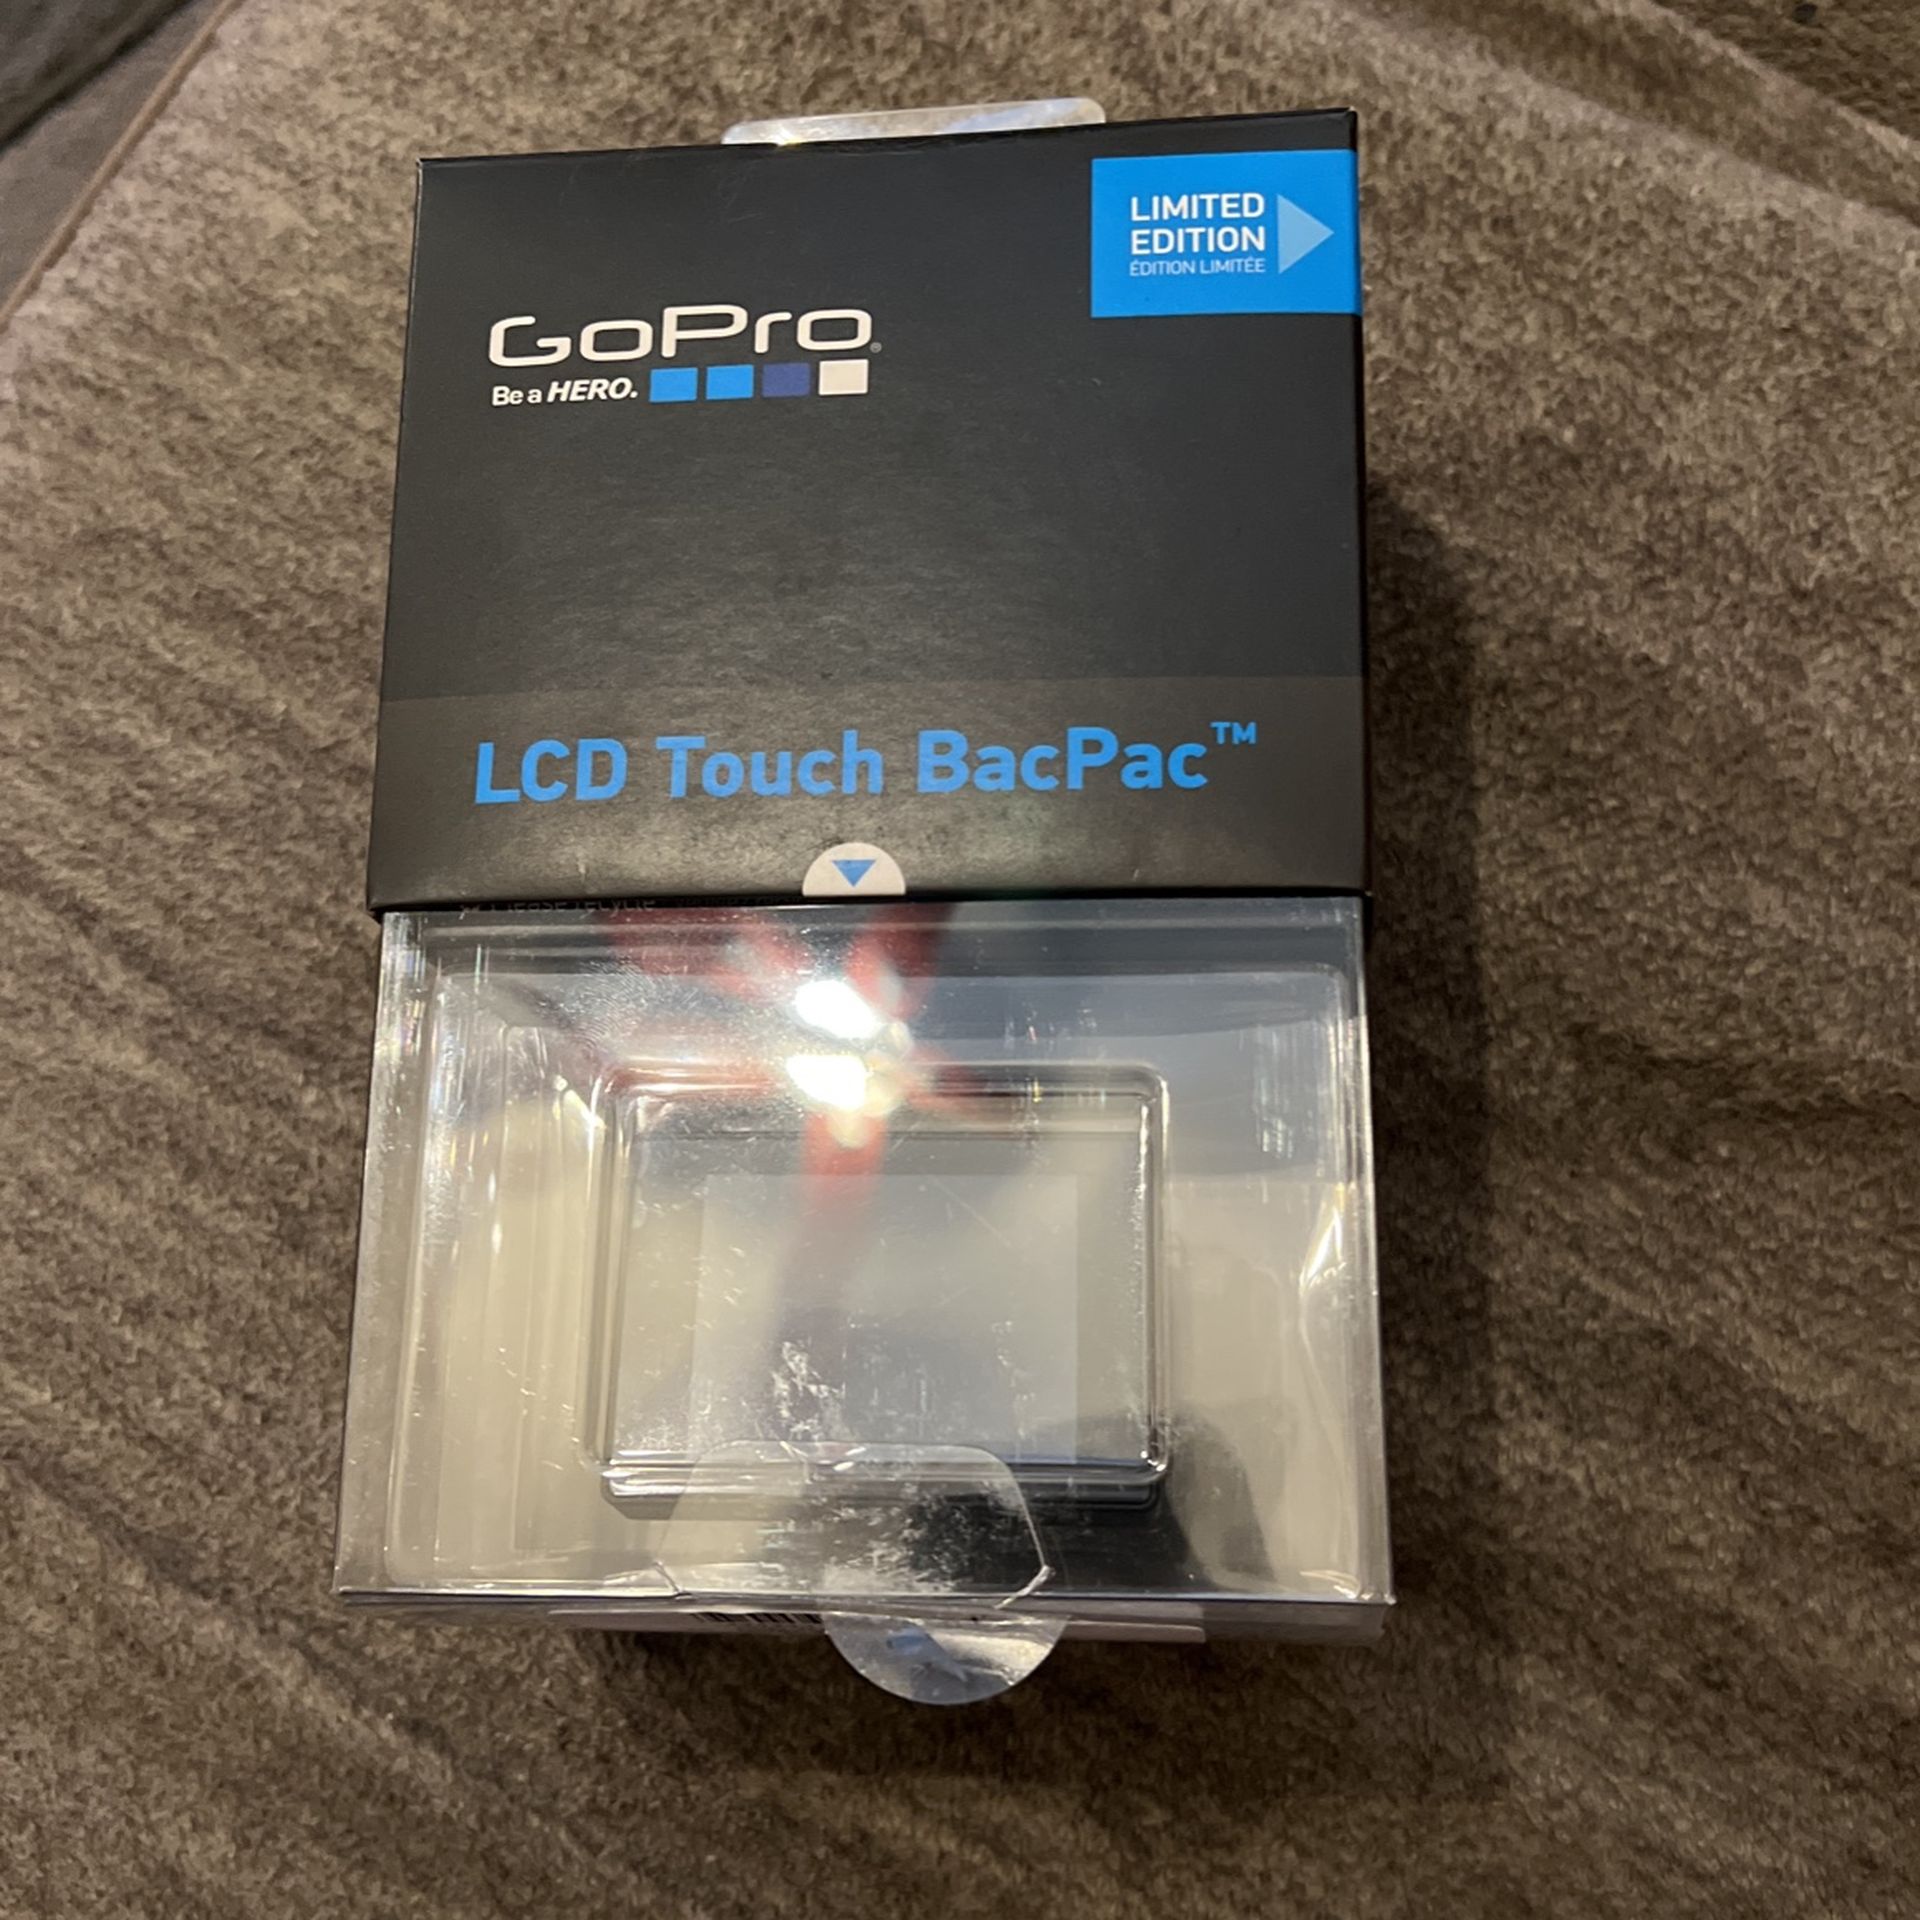 Go Pro LCD Touch BacPac